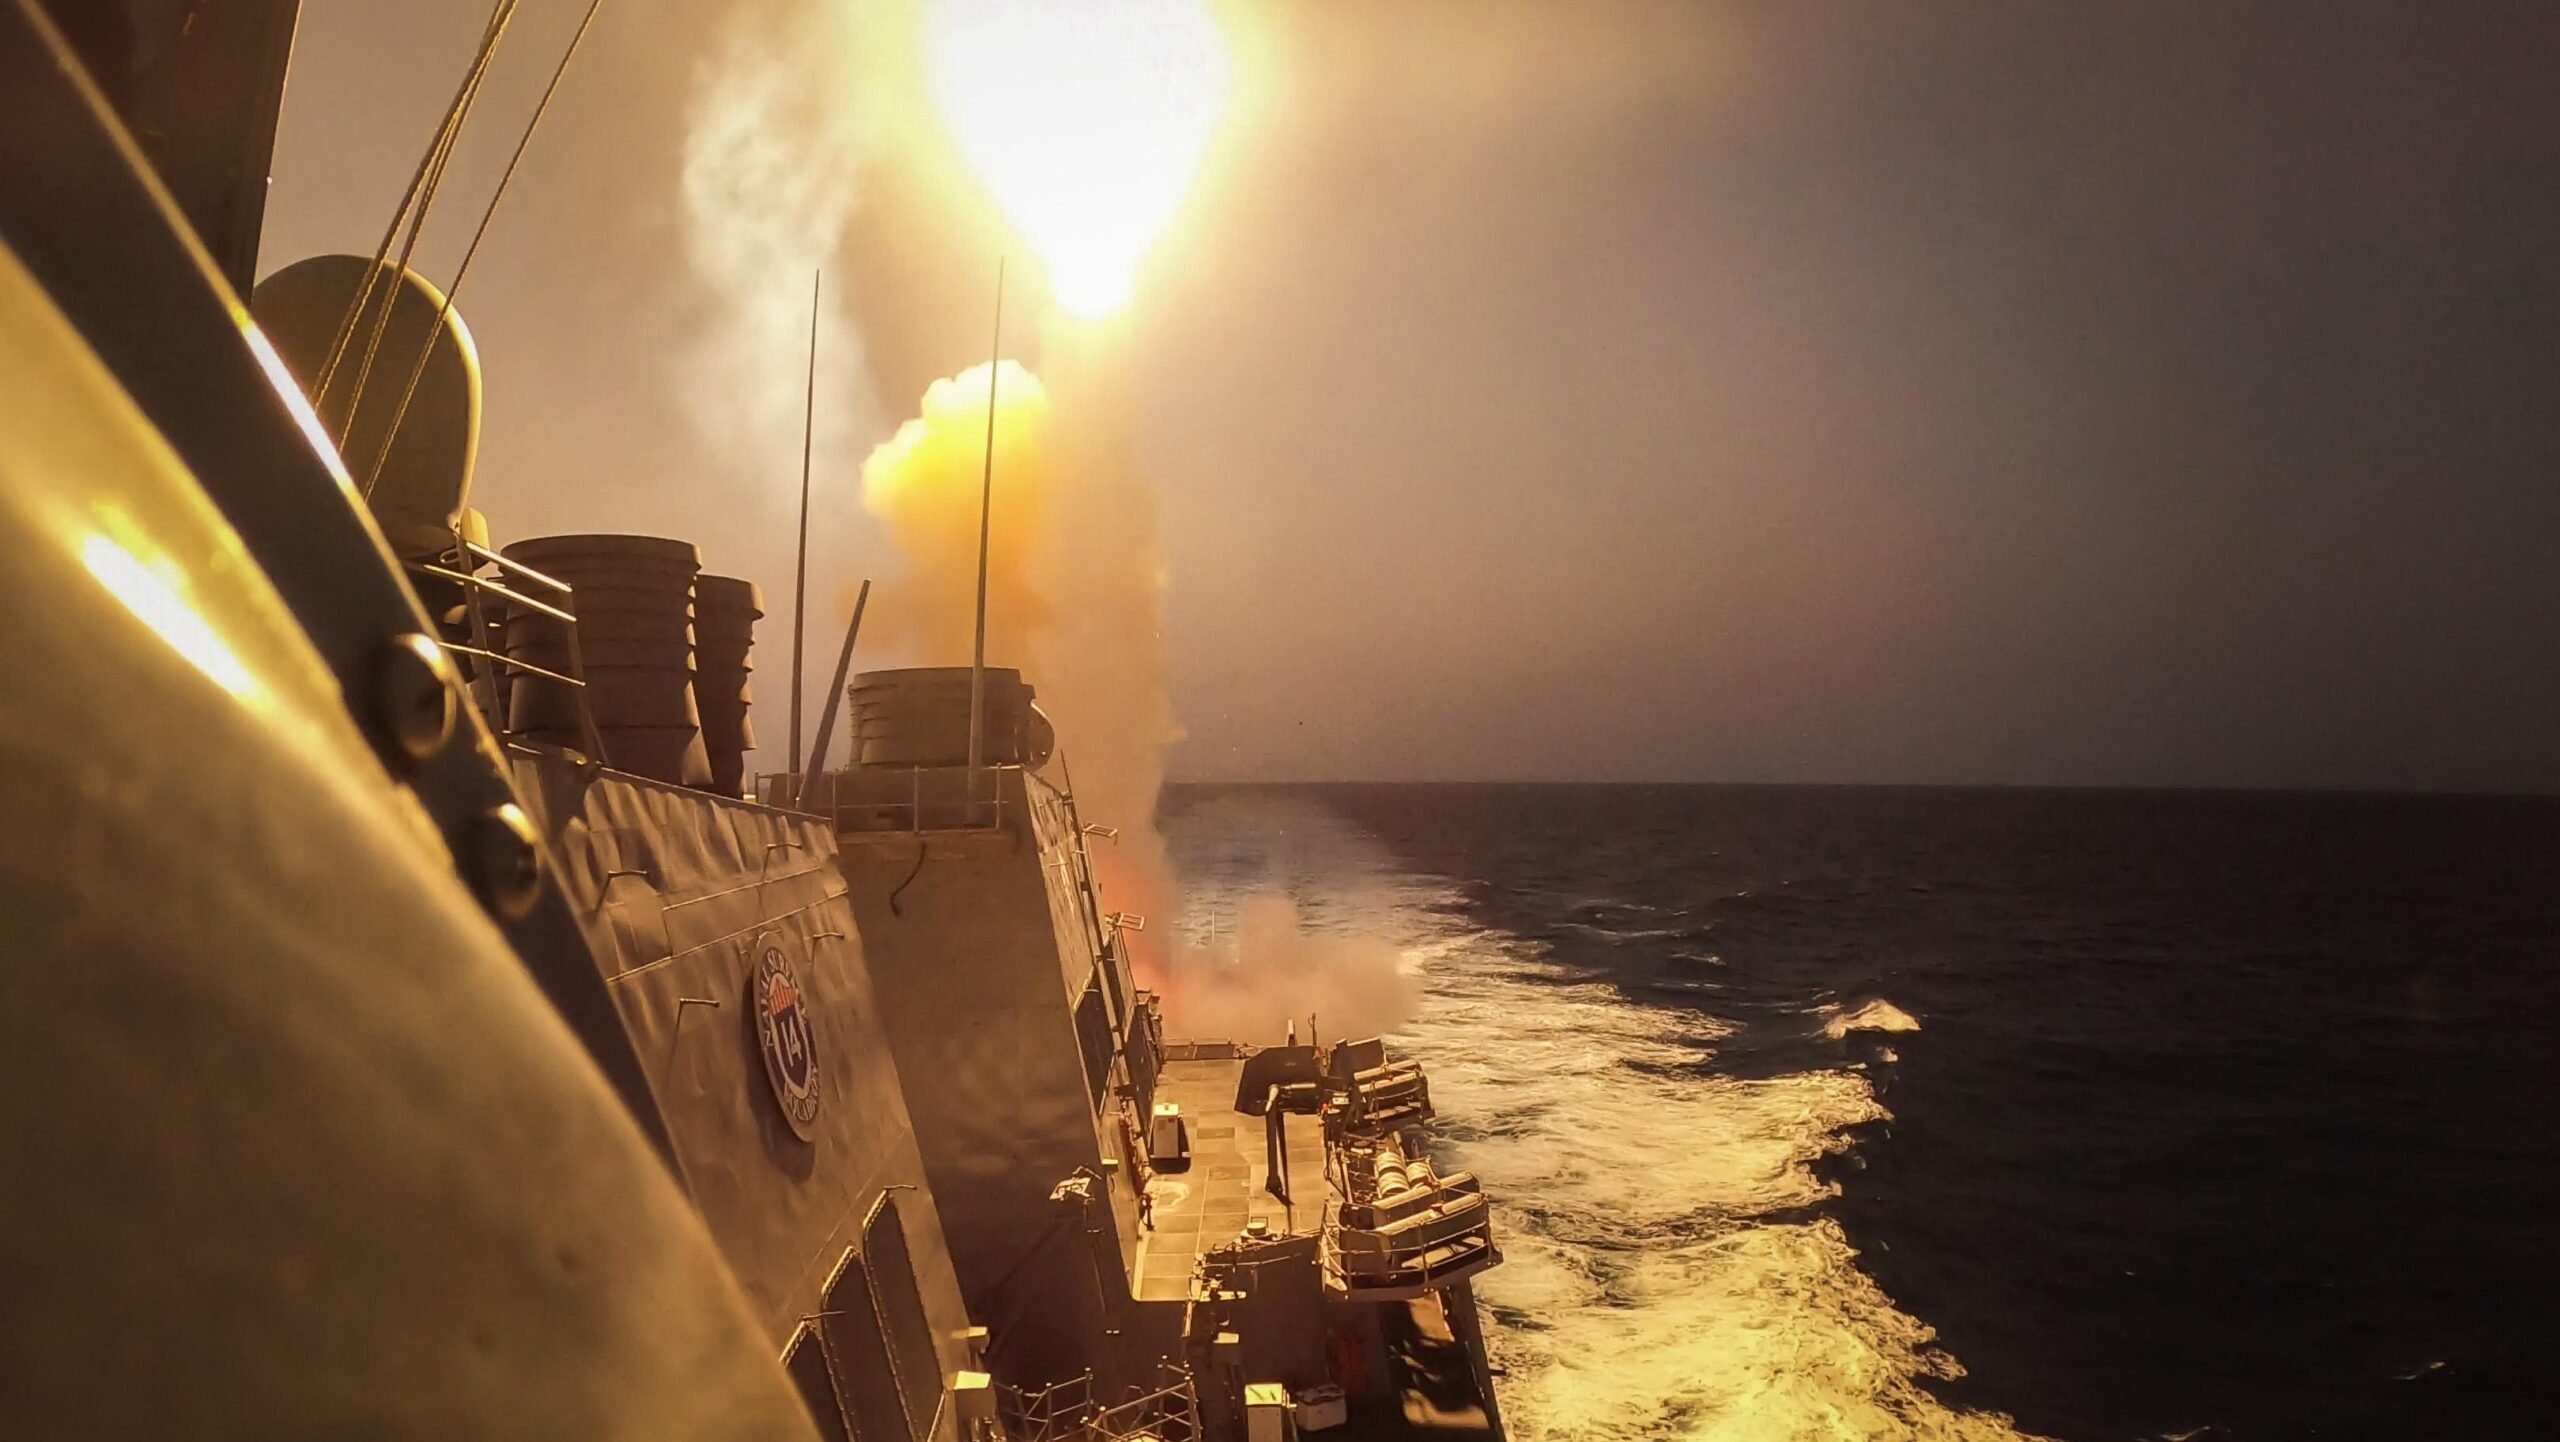 To deter Houthi strikes in Red Sea, US must turn from defense to offense